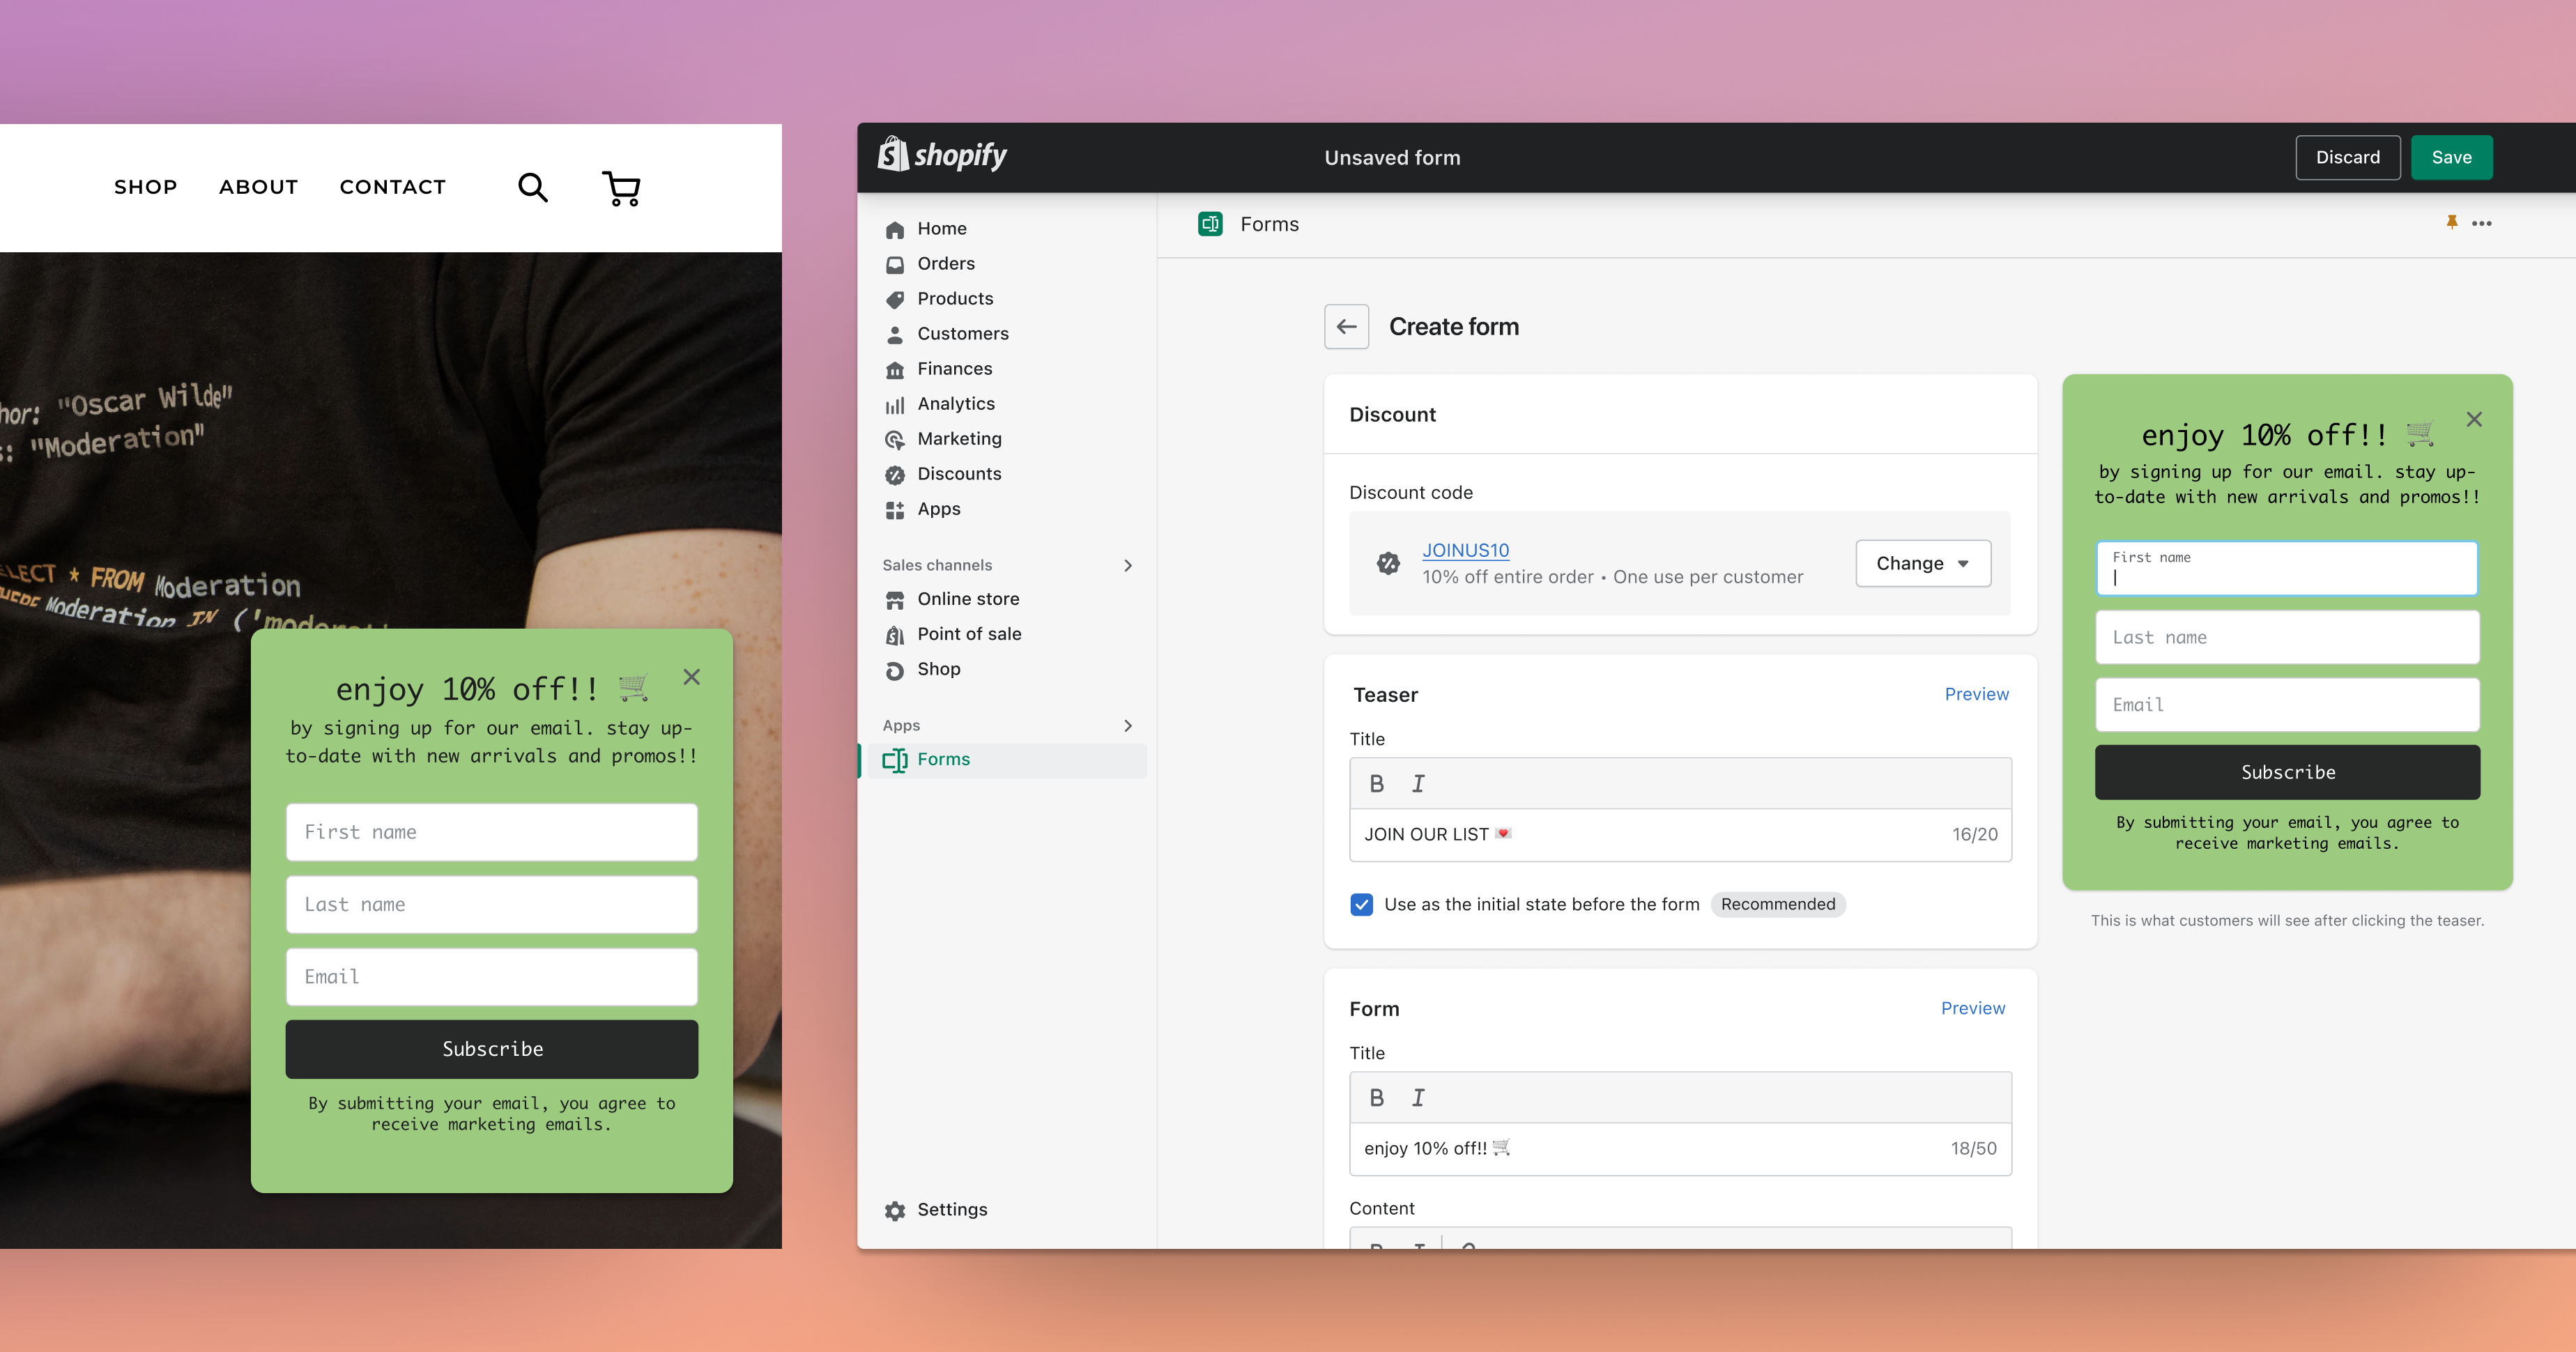 Shopify Forms is now available: a free email capture tool for Shopify